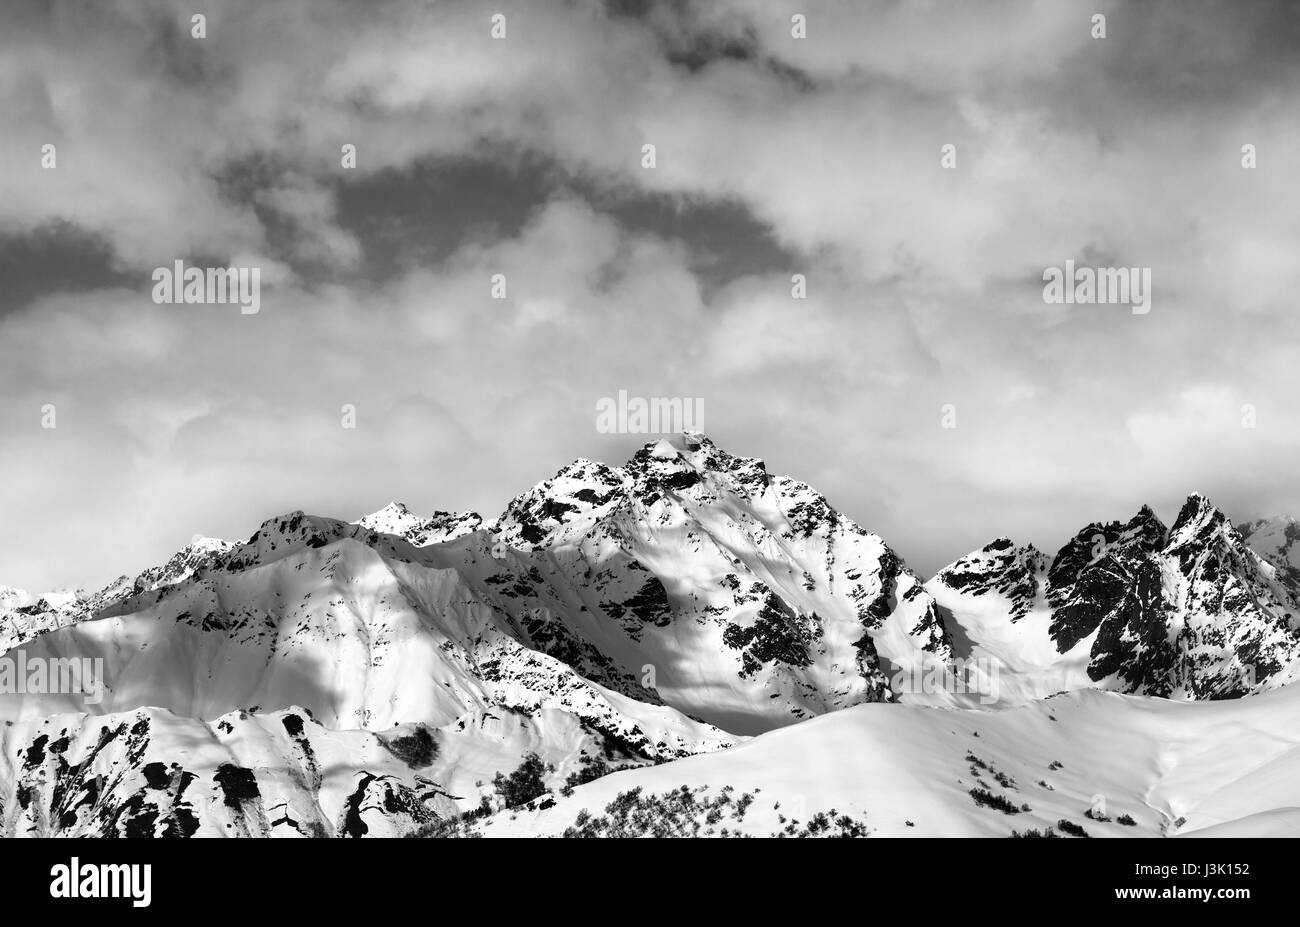 Black and white snow slope and winter sunlight mountains in clouds. Caucasus Mountains, Svaneti region of Georgia. Stock Photo